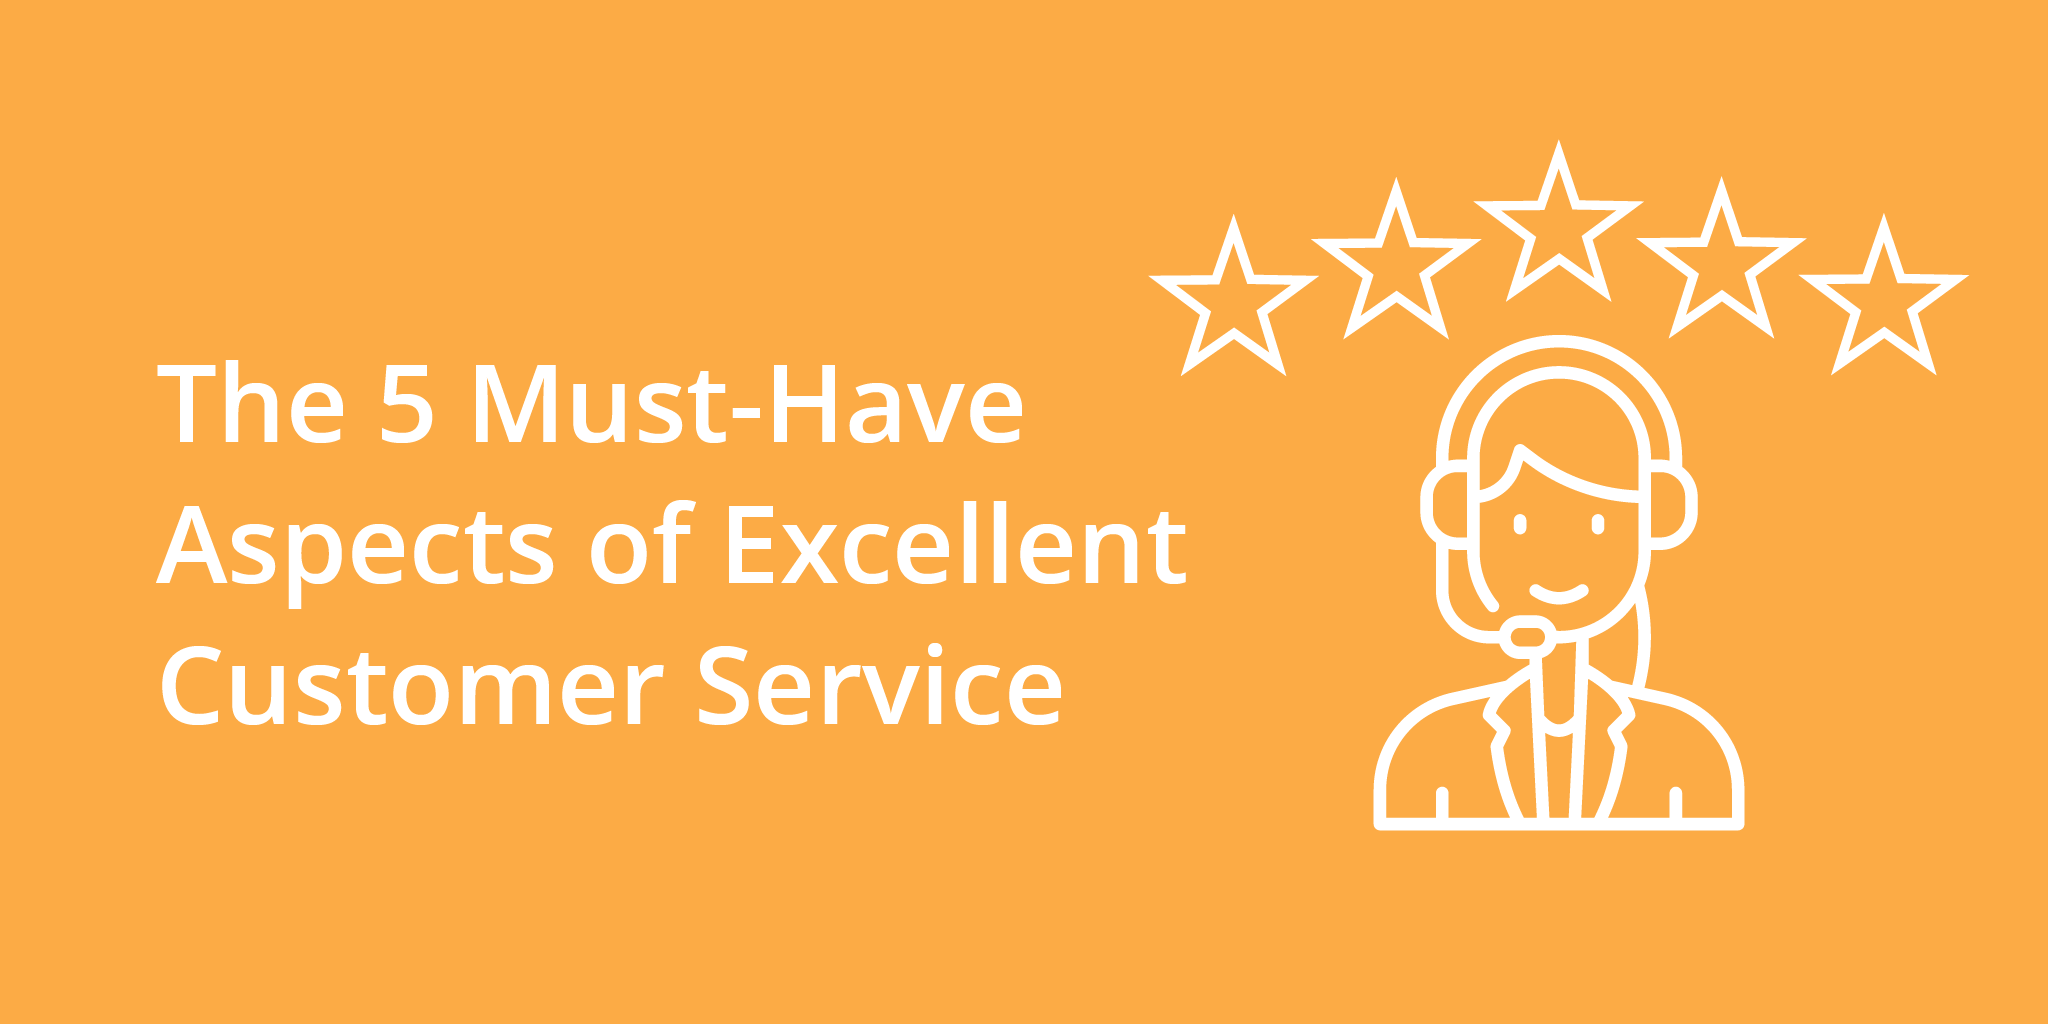 The 5 Must-Have Aspects of Excellent Customer Service | Telephones for business